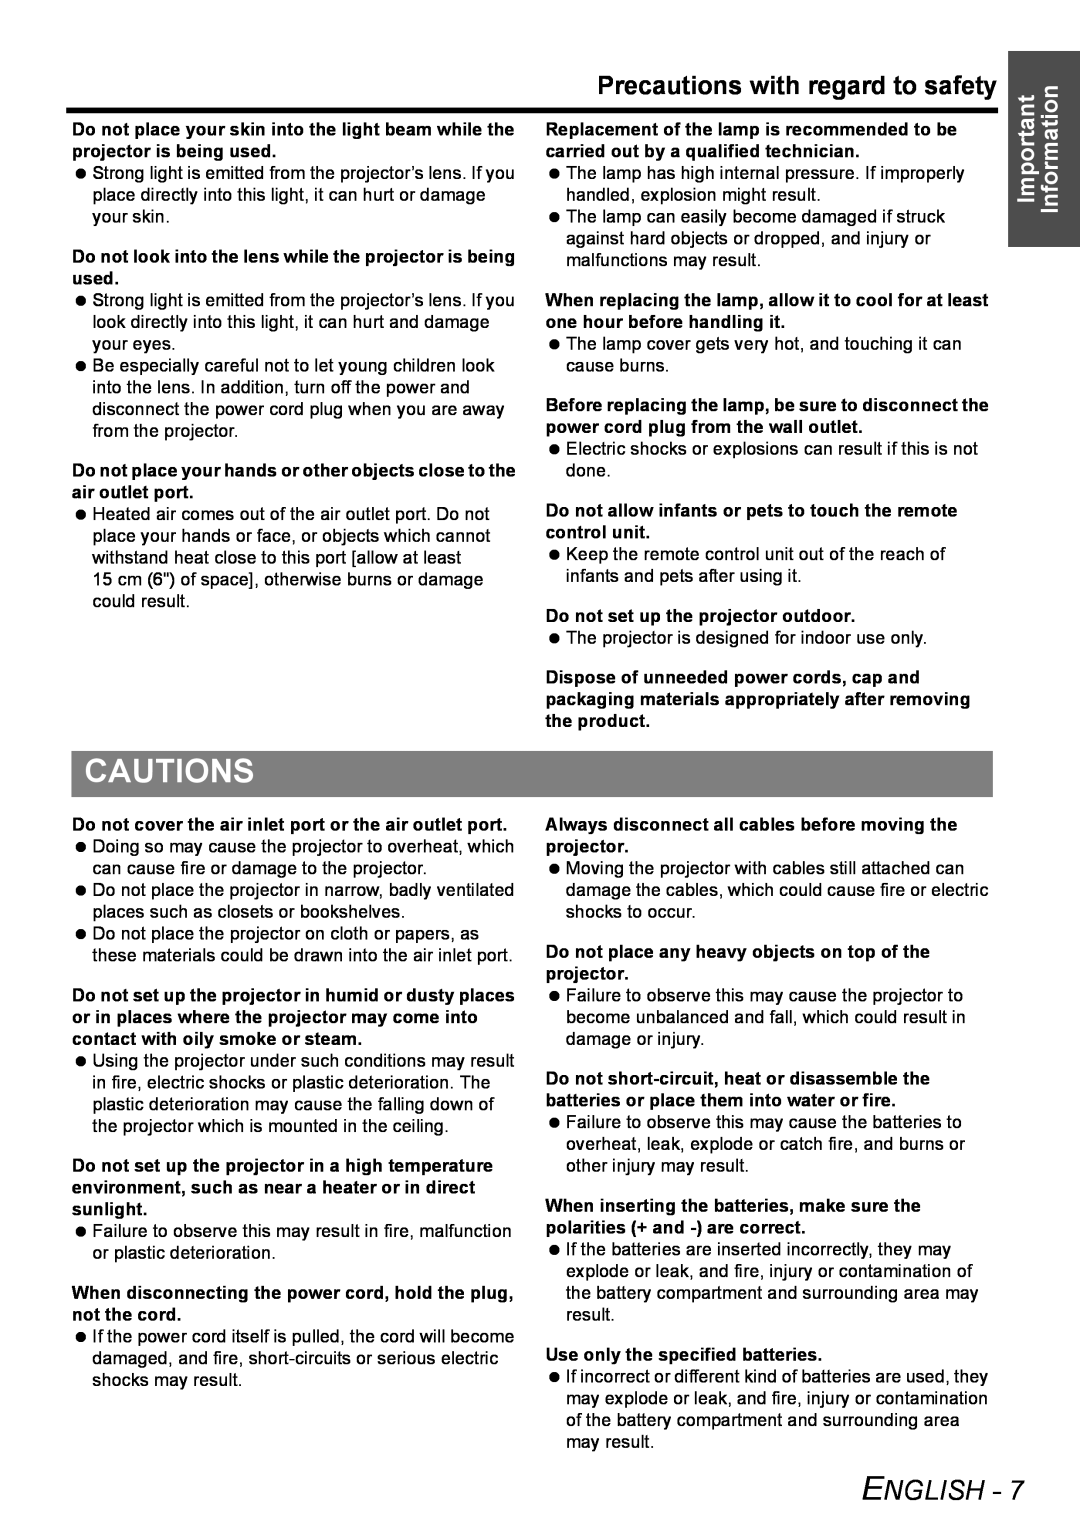 Philips PT-LB51SU manual Cautions, Precautions with regard to safety, English 